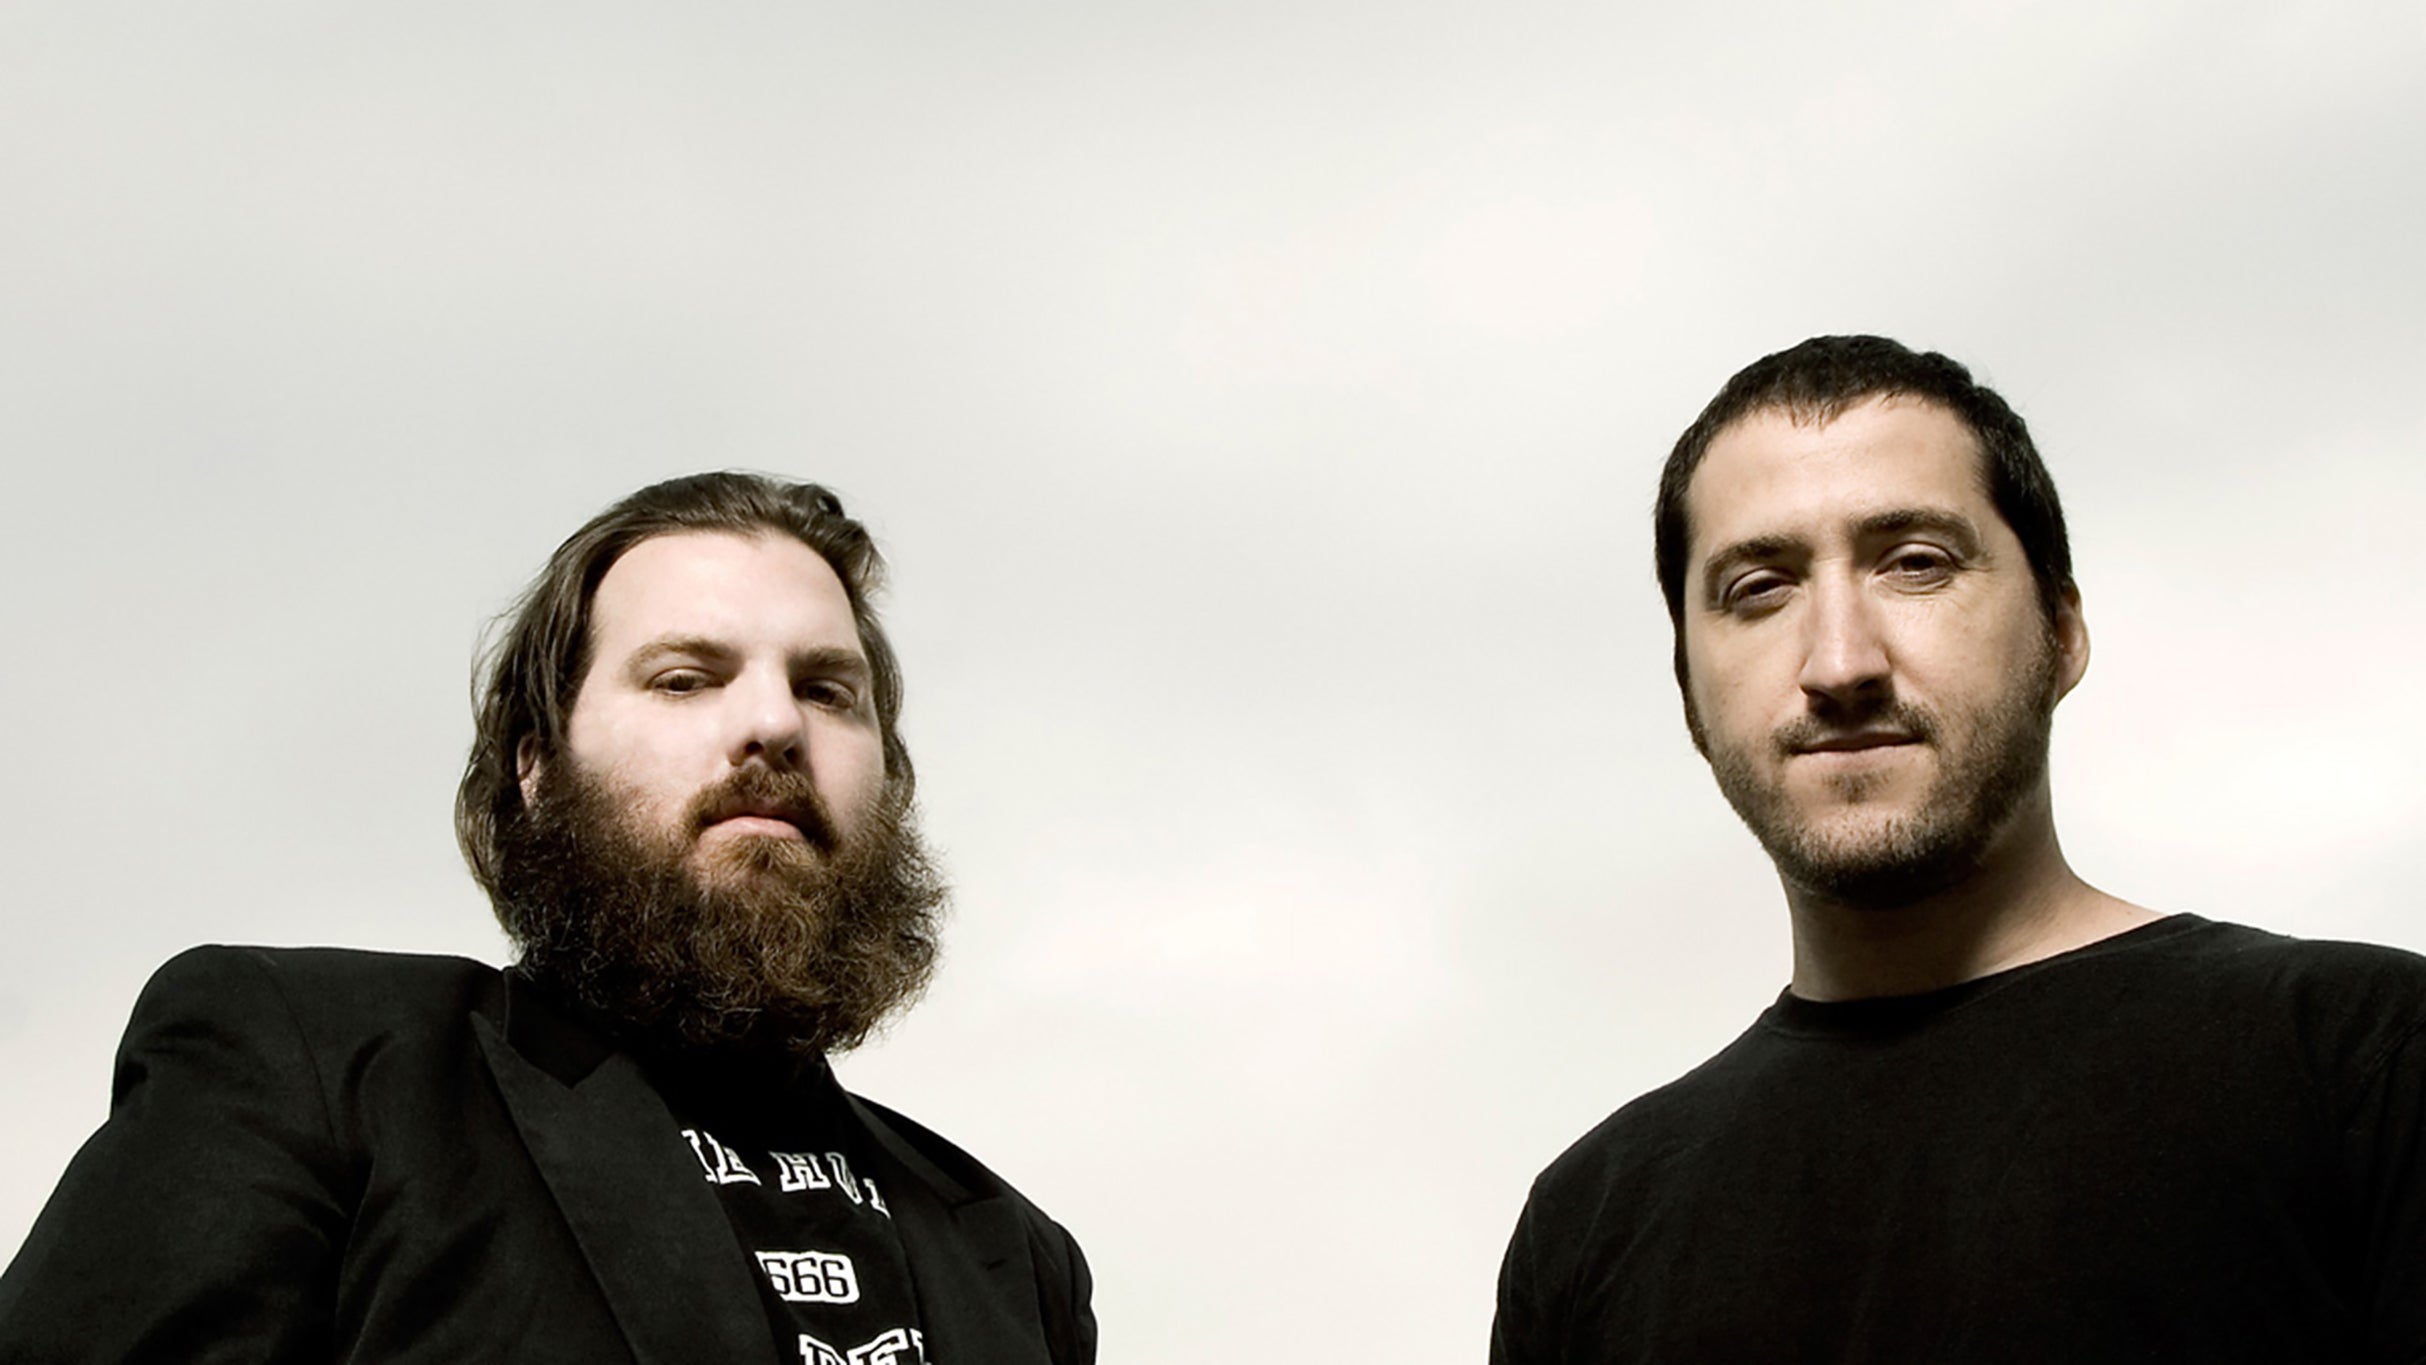 Pinback at Aggie Theater